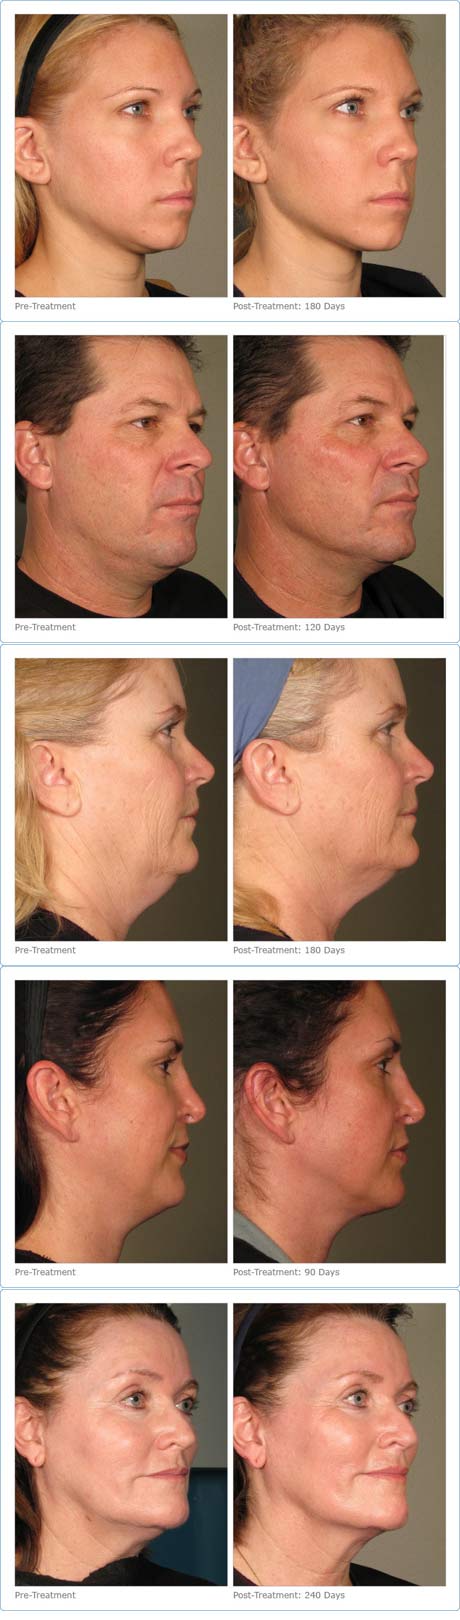 Rox Spa Ultherapy Before and After pictures